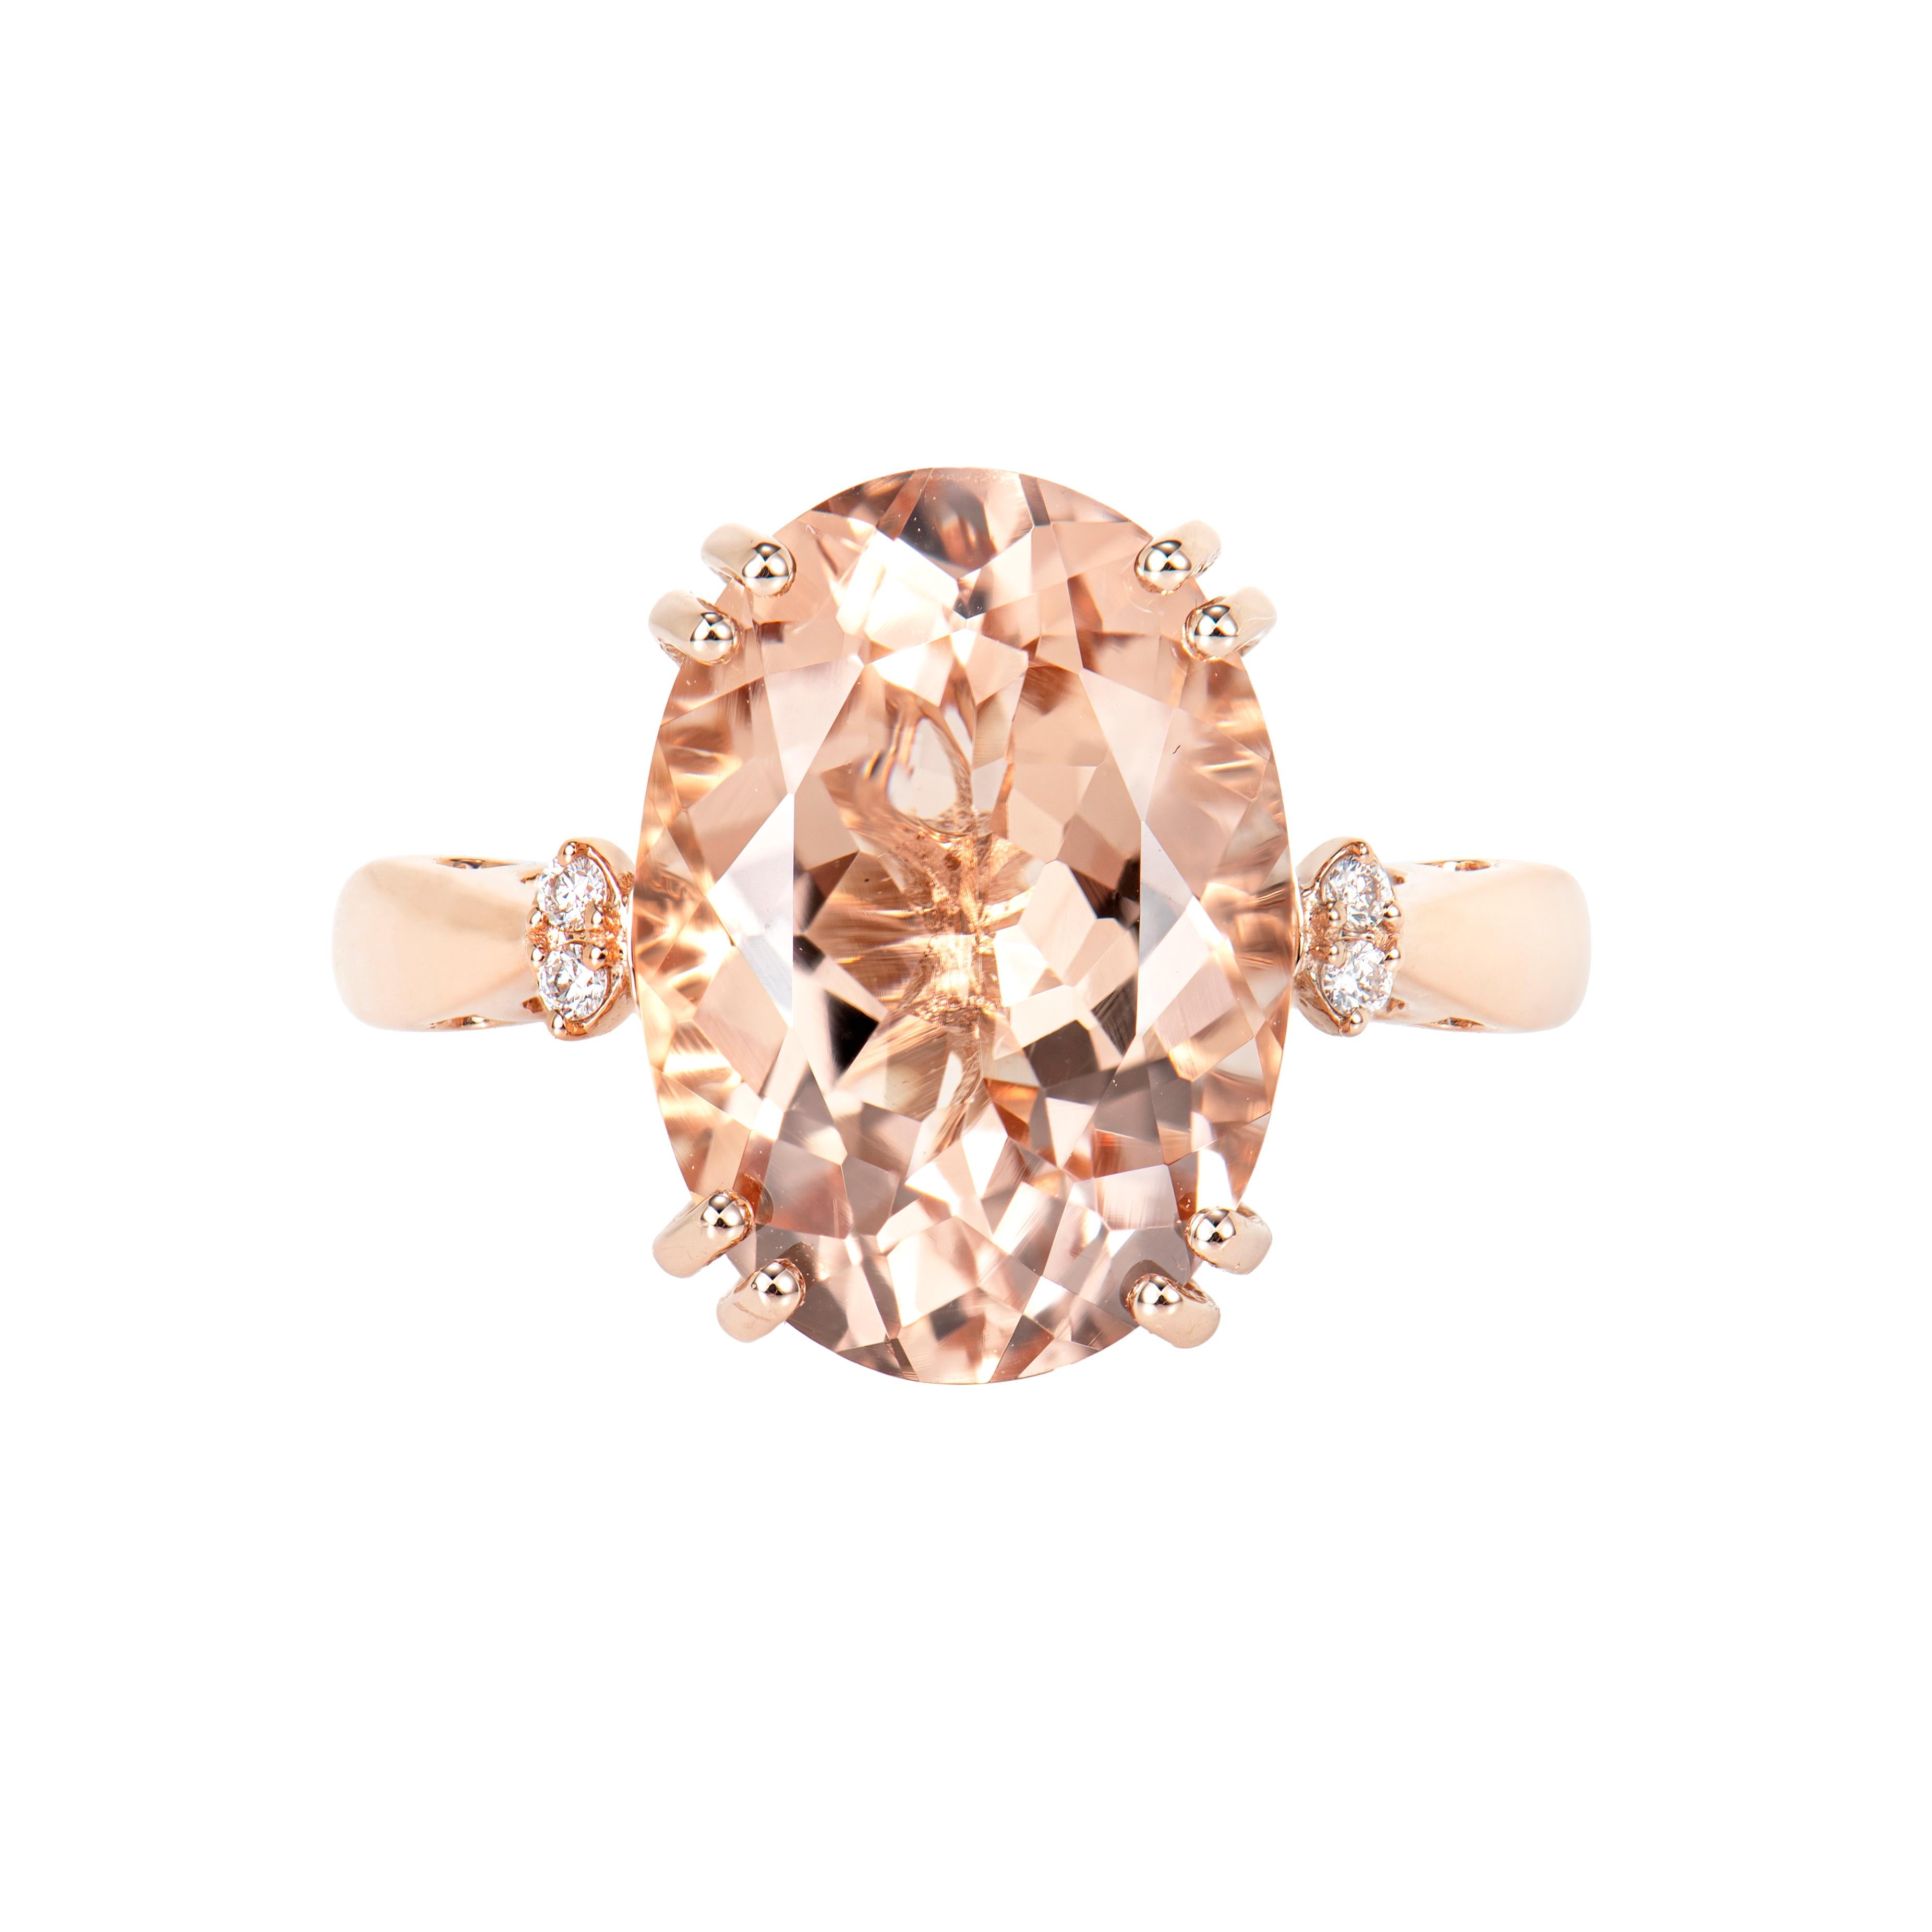 Contemporary 6.12 Carat Morganite Fancy Ring in 18Karat Rose Gold with White Diamond.   For Sale